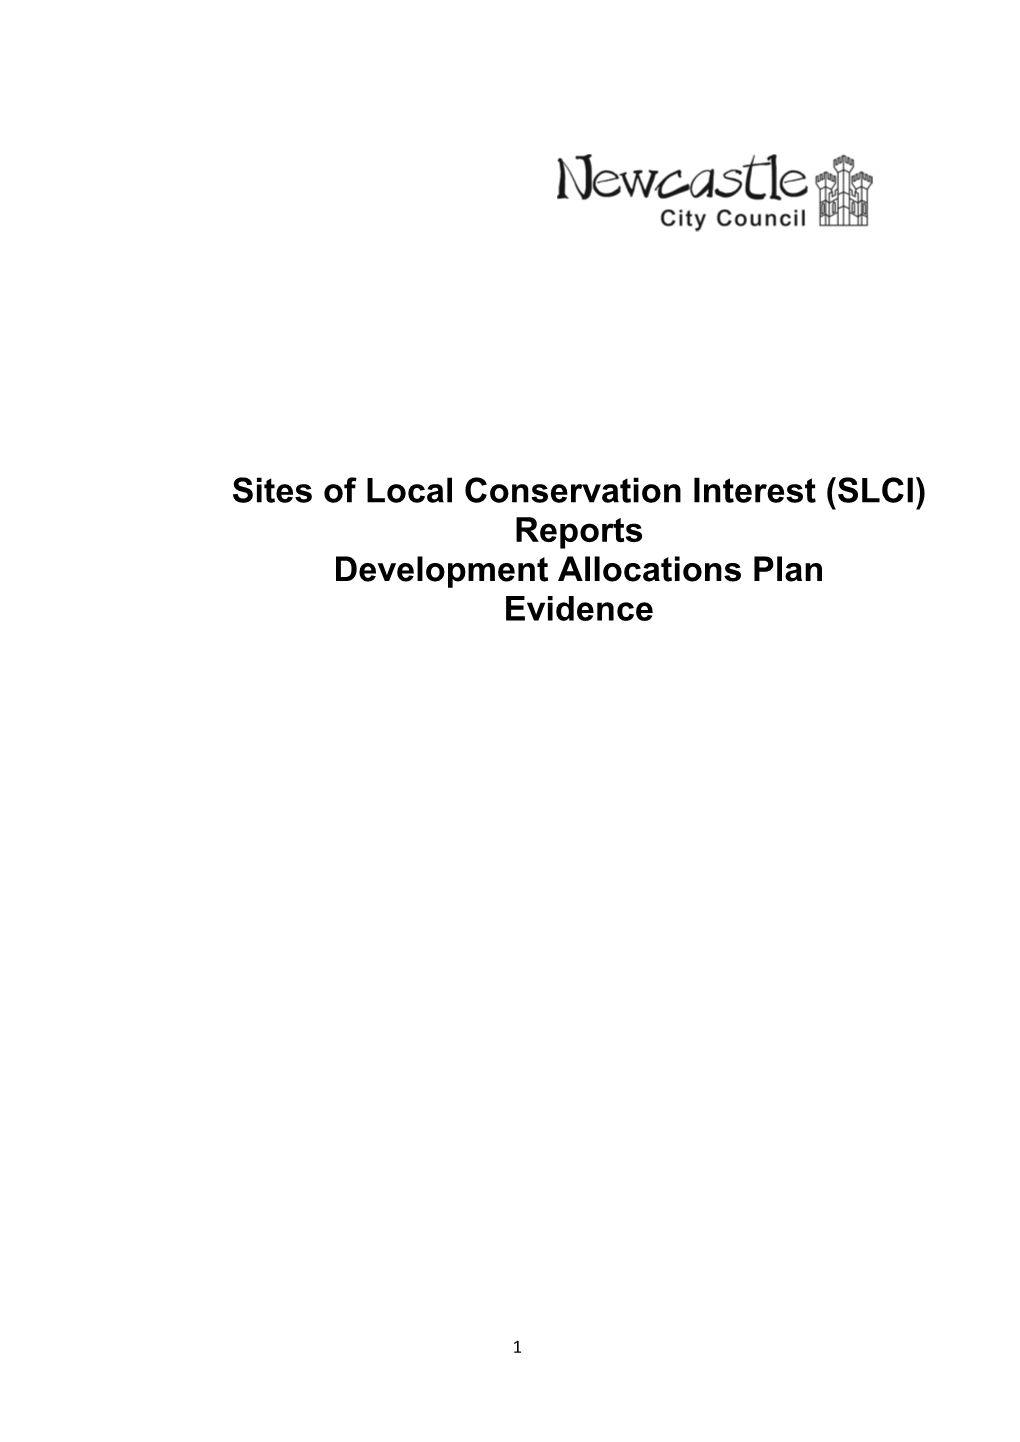 Sites of Local Conservation Interest (SLCI) Reports Development Allocations Plan Evidence